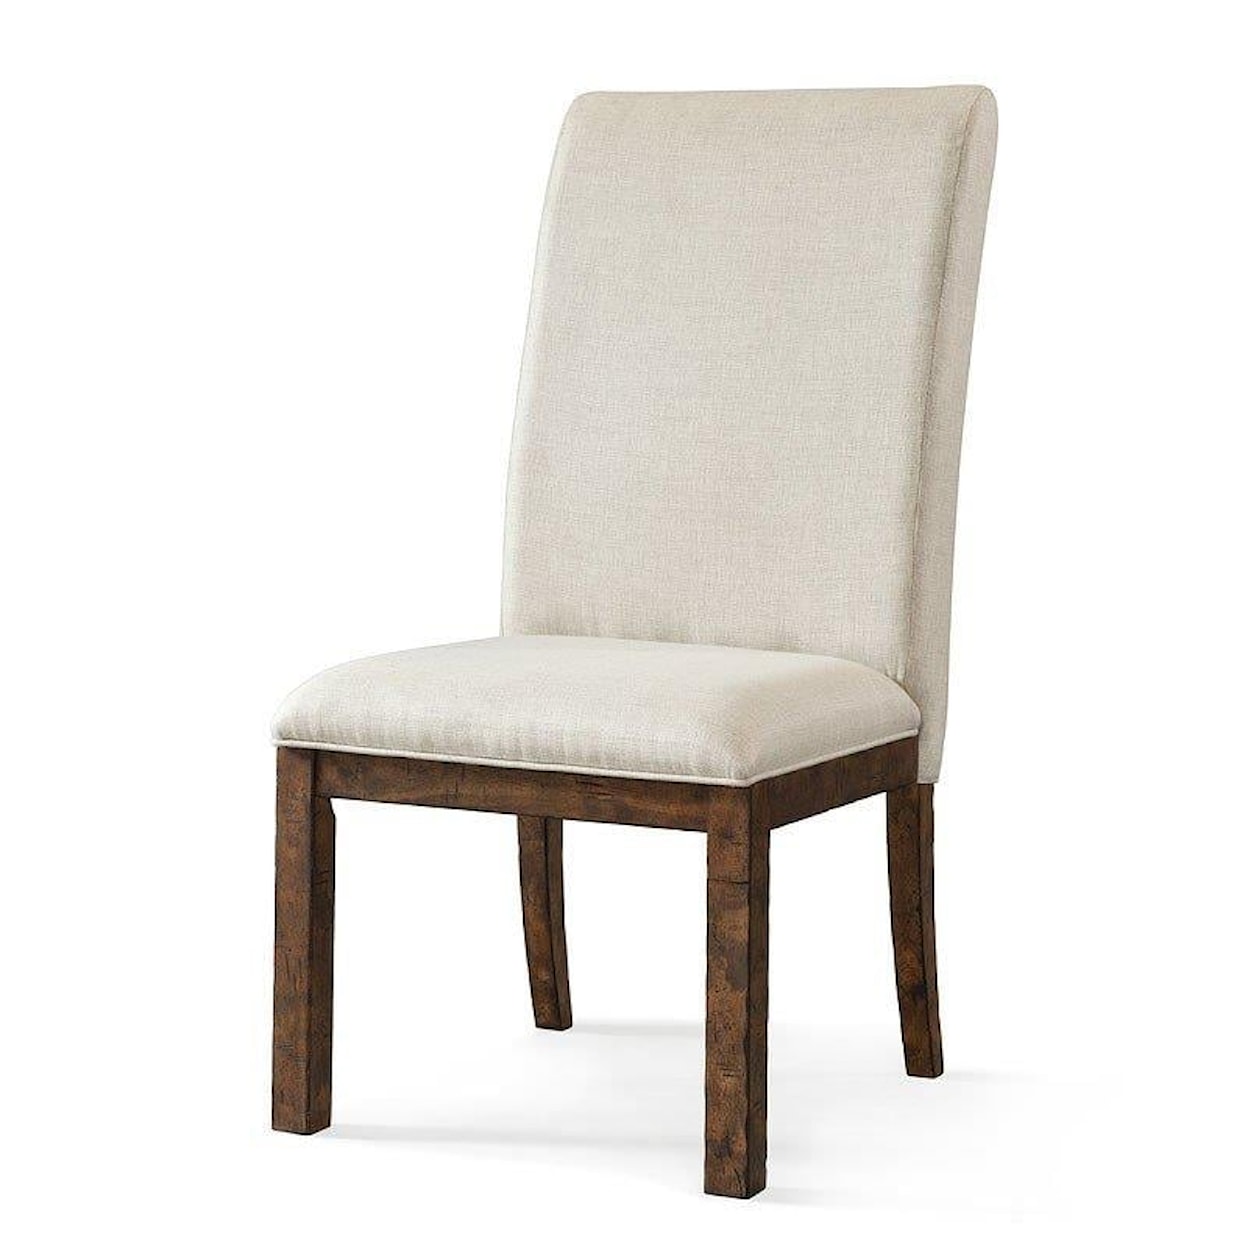 Trisha Yearwood Home Collection by Legacy Classic Trisha Yearwood Home Upholstered Parson Chair